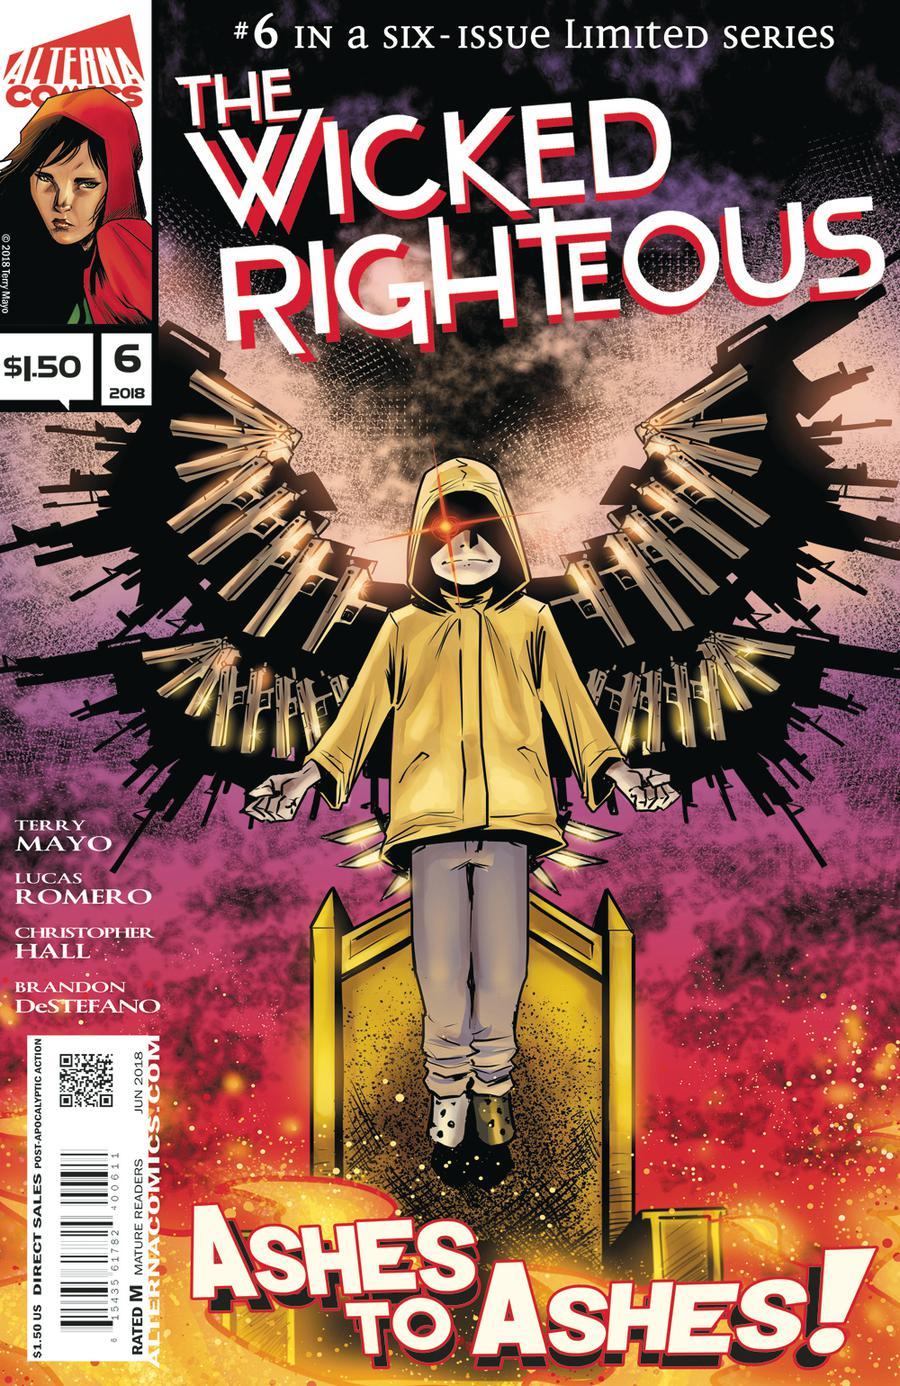 Wicked Righteous Vol. 1 #6